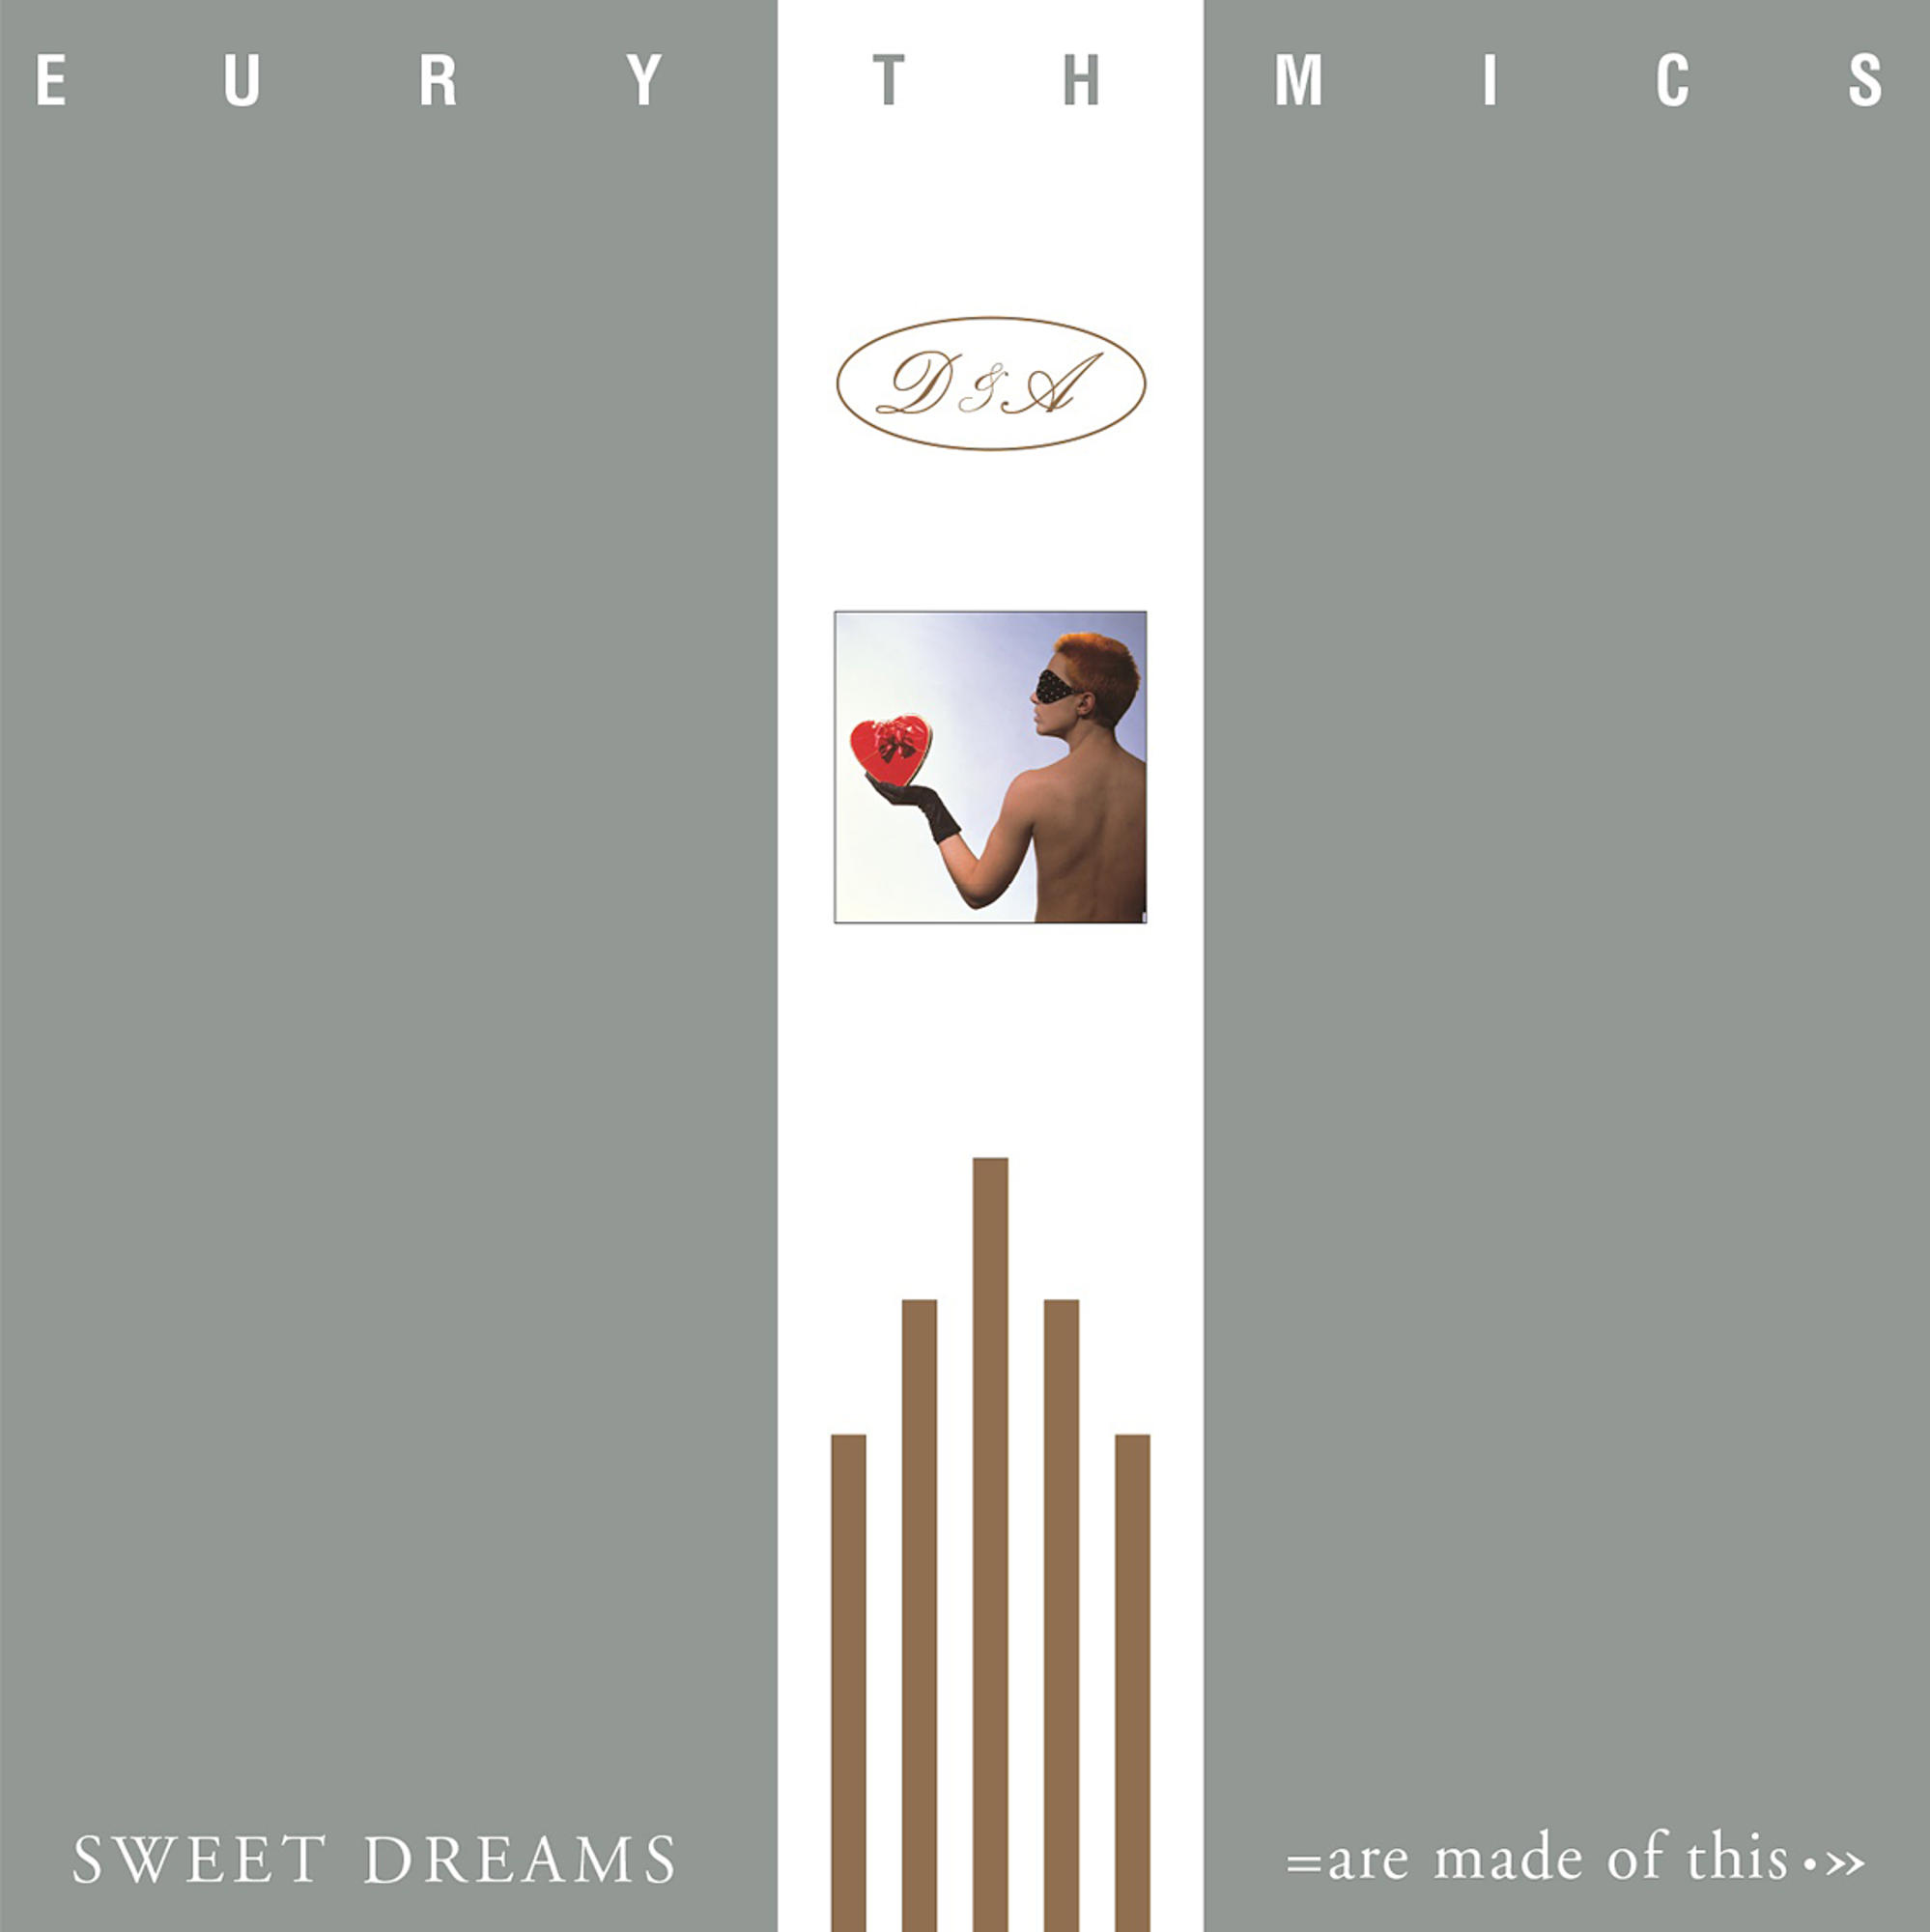 Dreams Eurythmics Sweet Made of - (Are - (Vinyl) This)